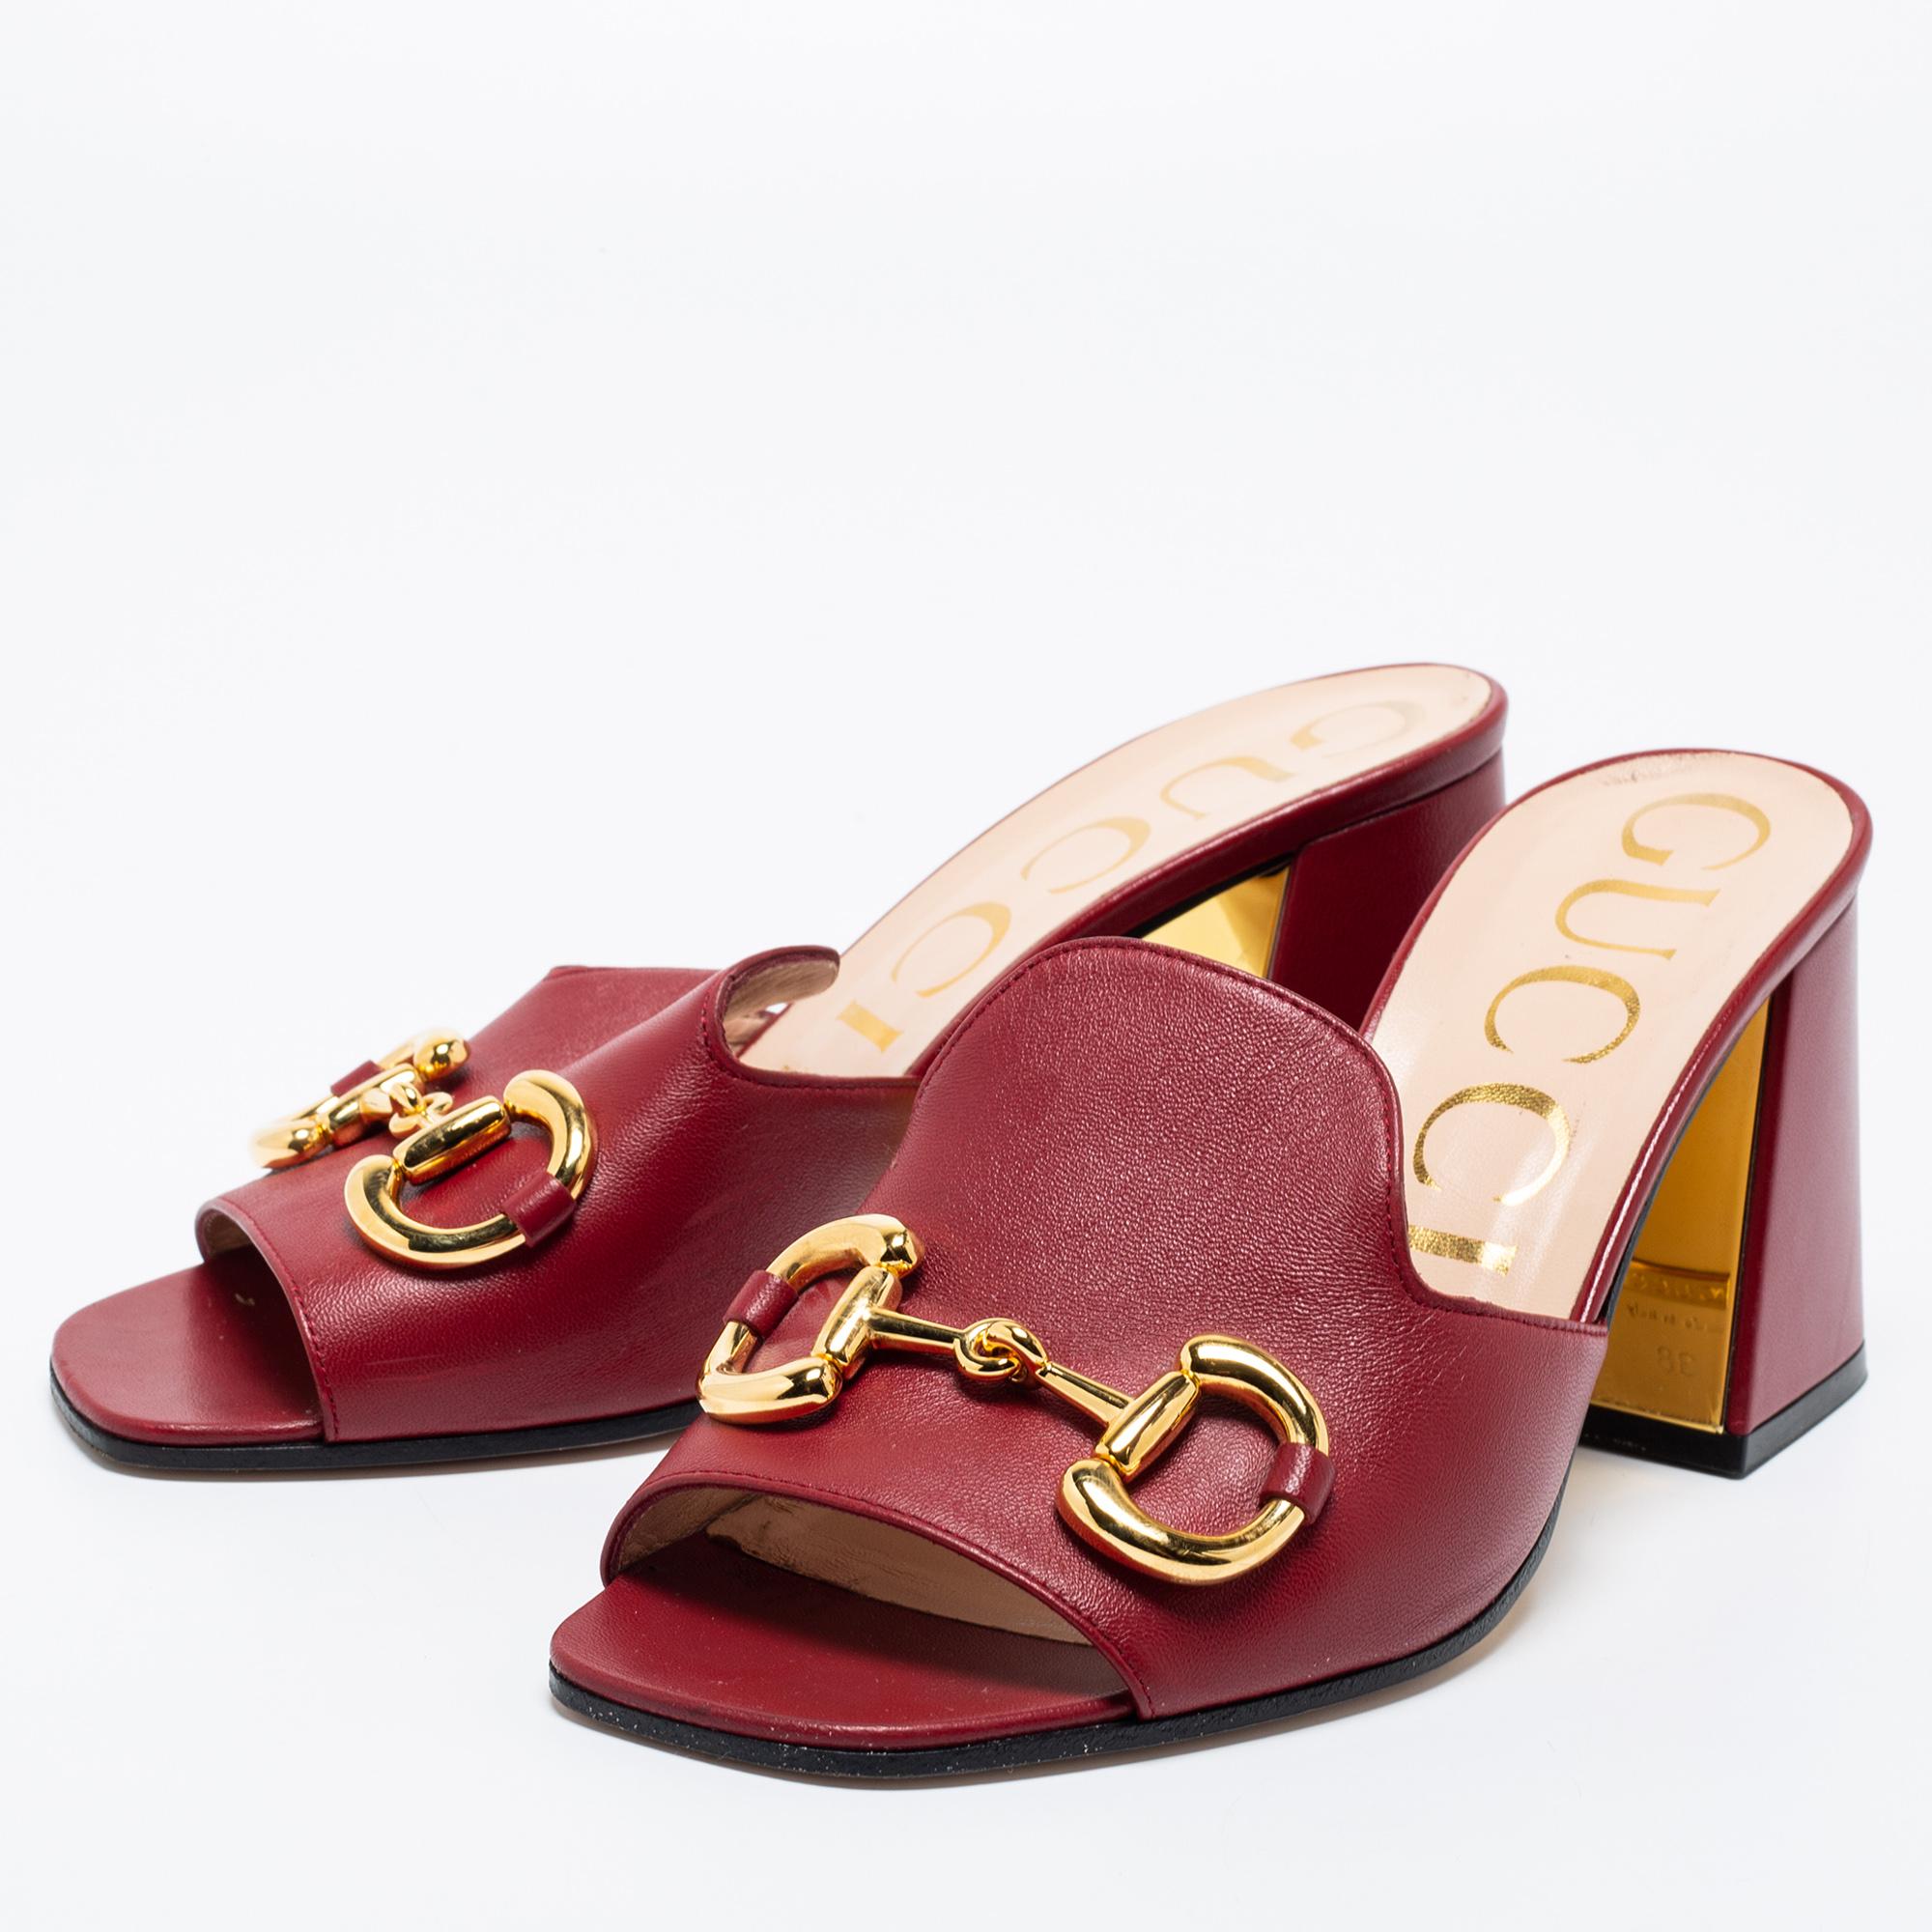 Open square-toed shoes are having a fashion moment right now! These Gucci sandals are made using glossy leather in a burgundy shade with the iconic Horsebit on the uppers for a signature touch. Chunky block heels will not only add an edge but oodles